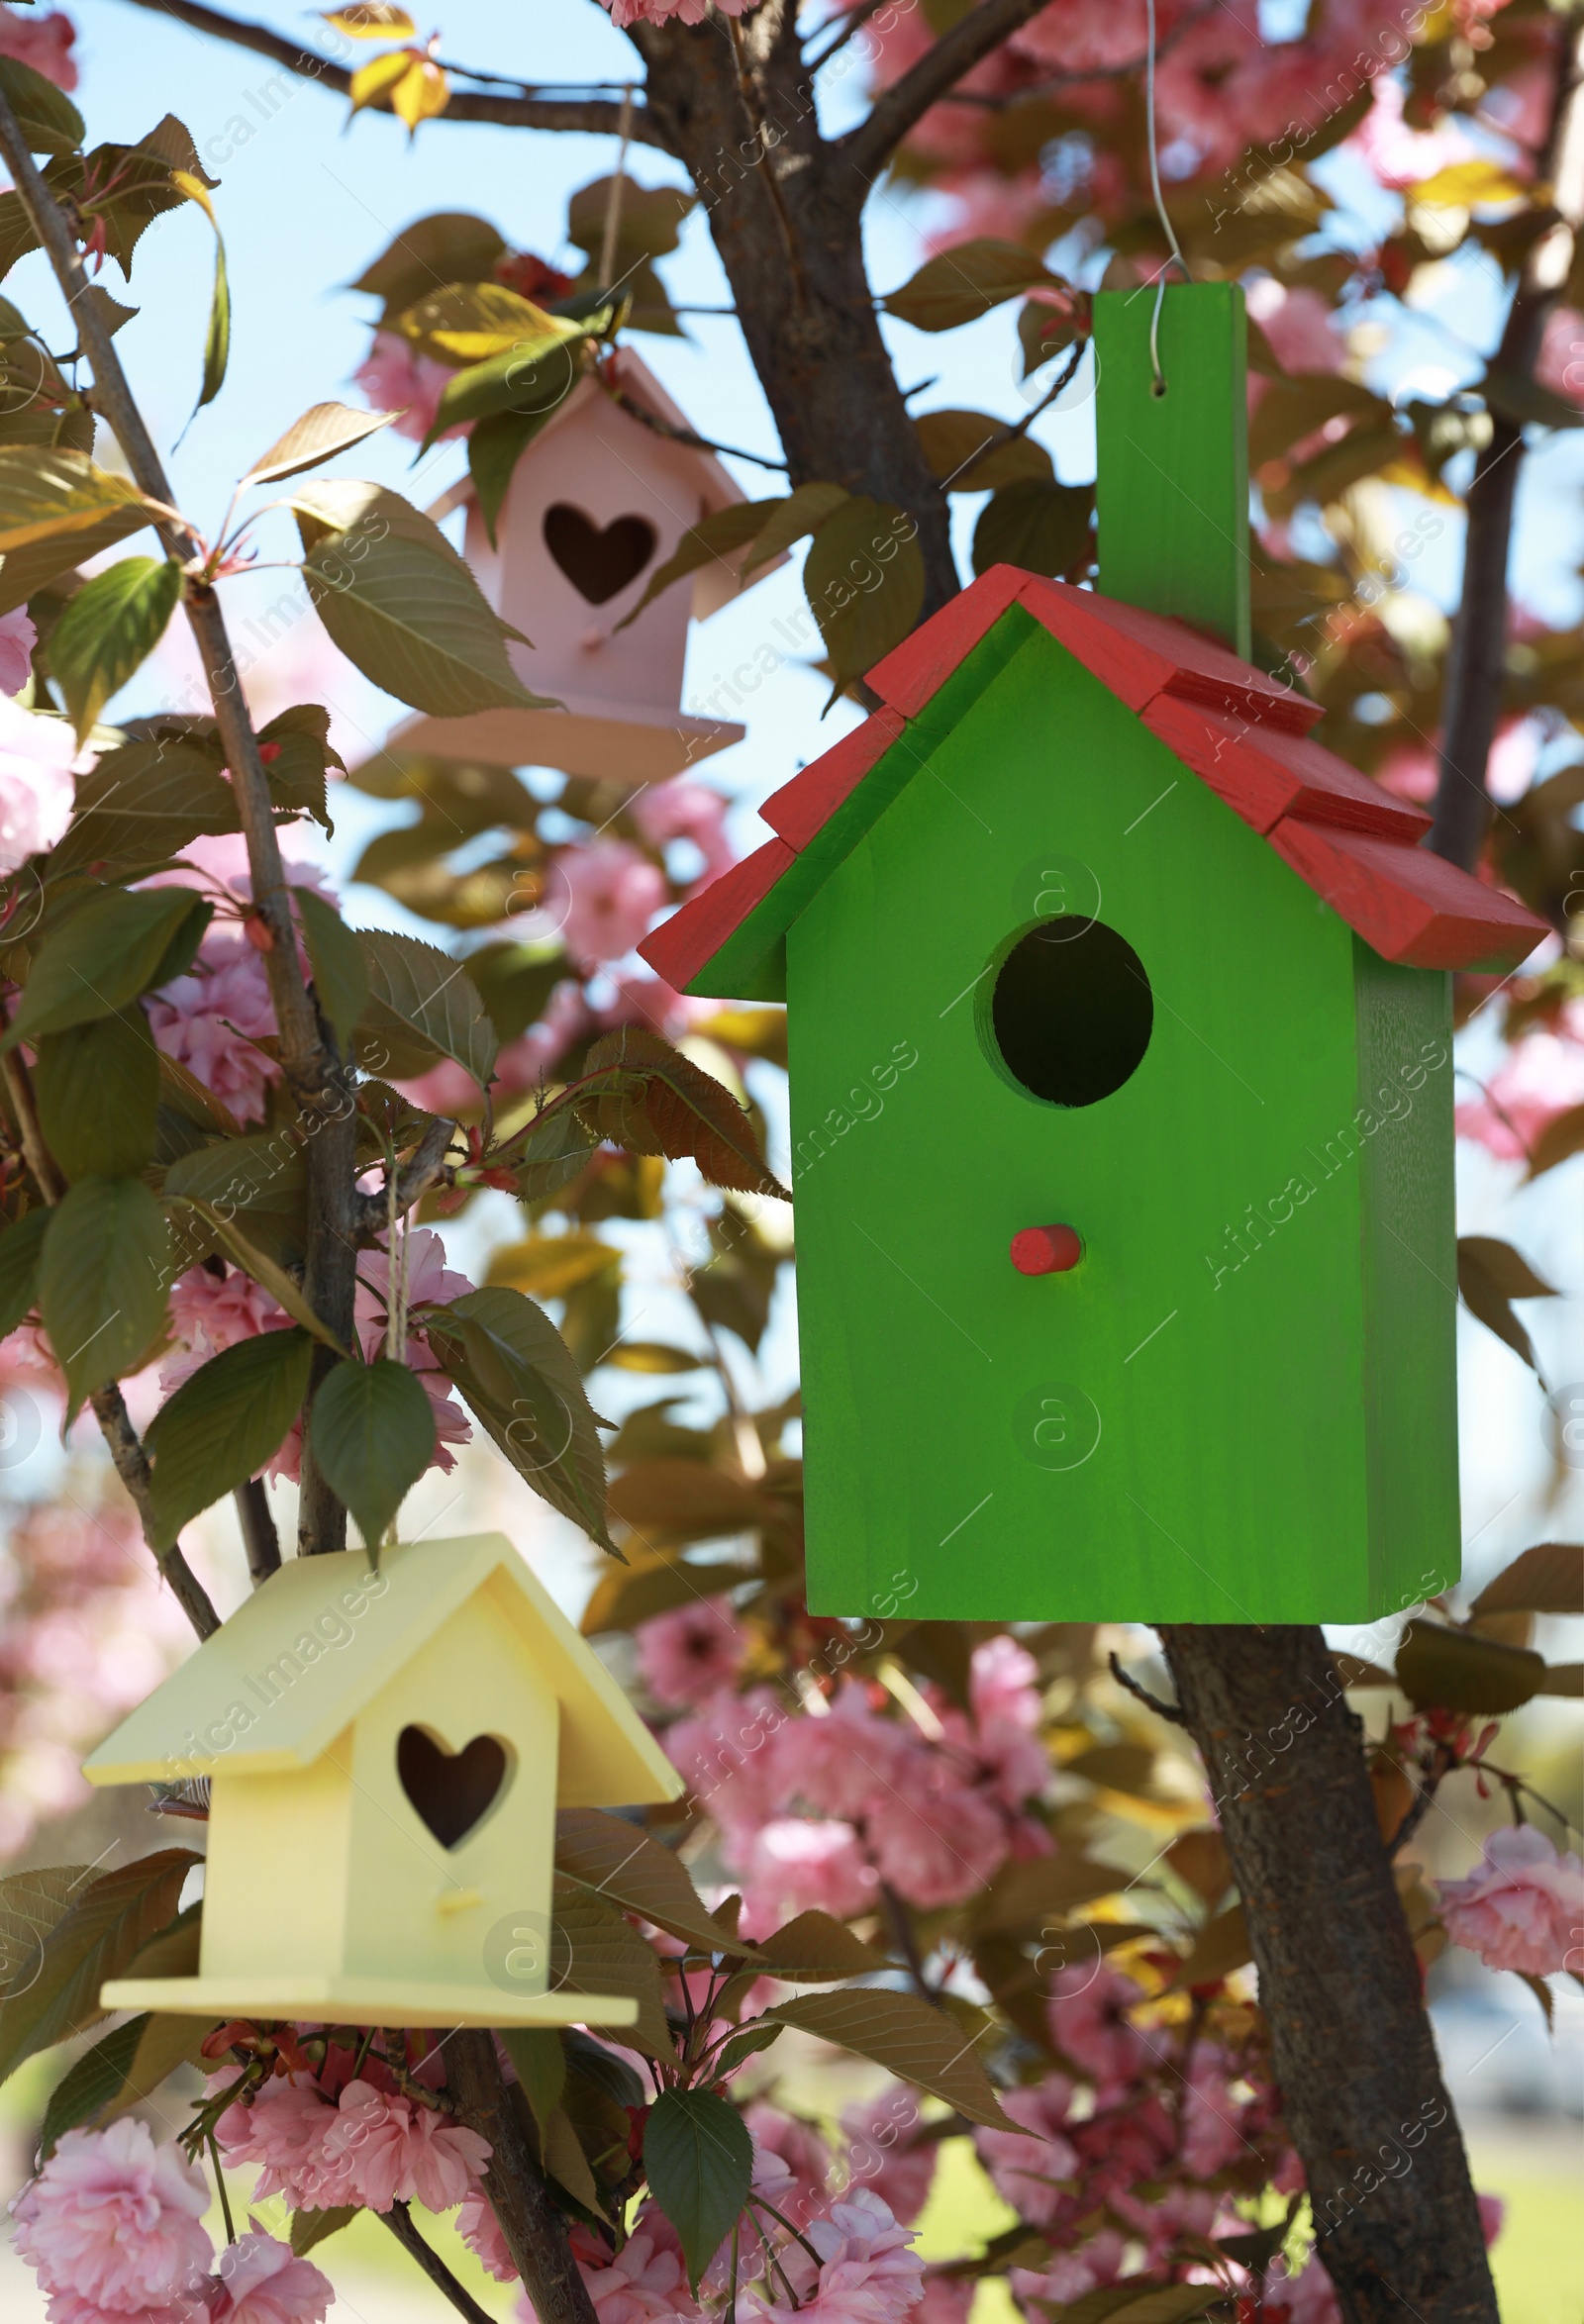 Photo of Bird houses hanging on tree branches outdoors